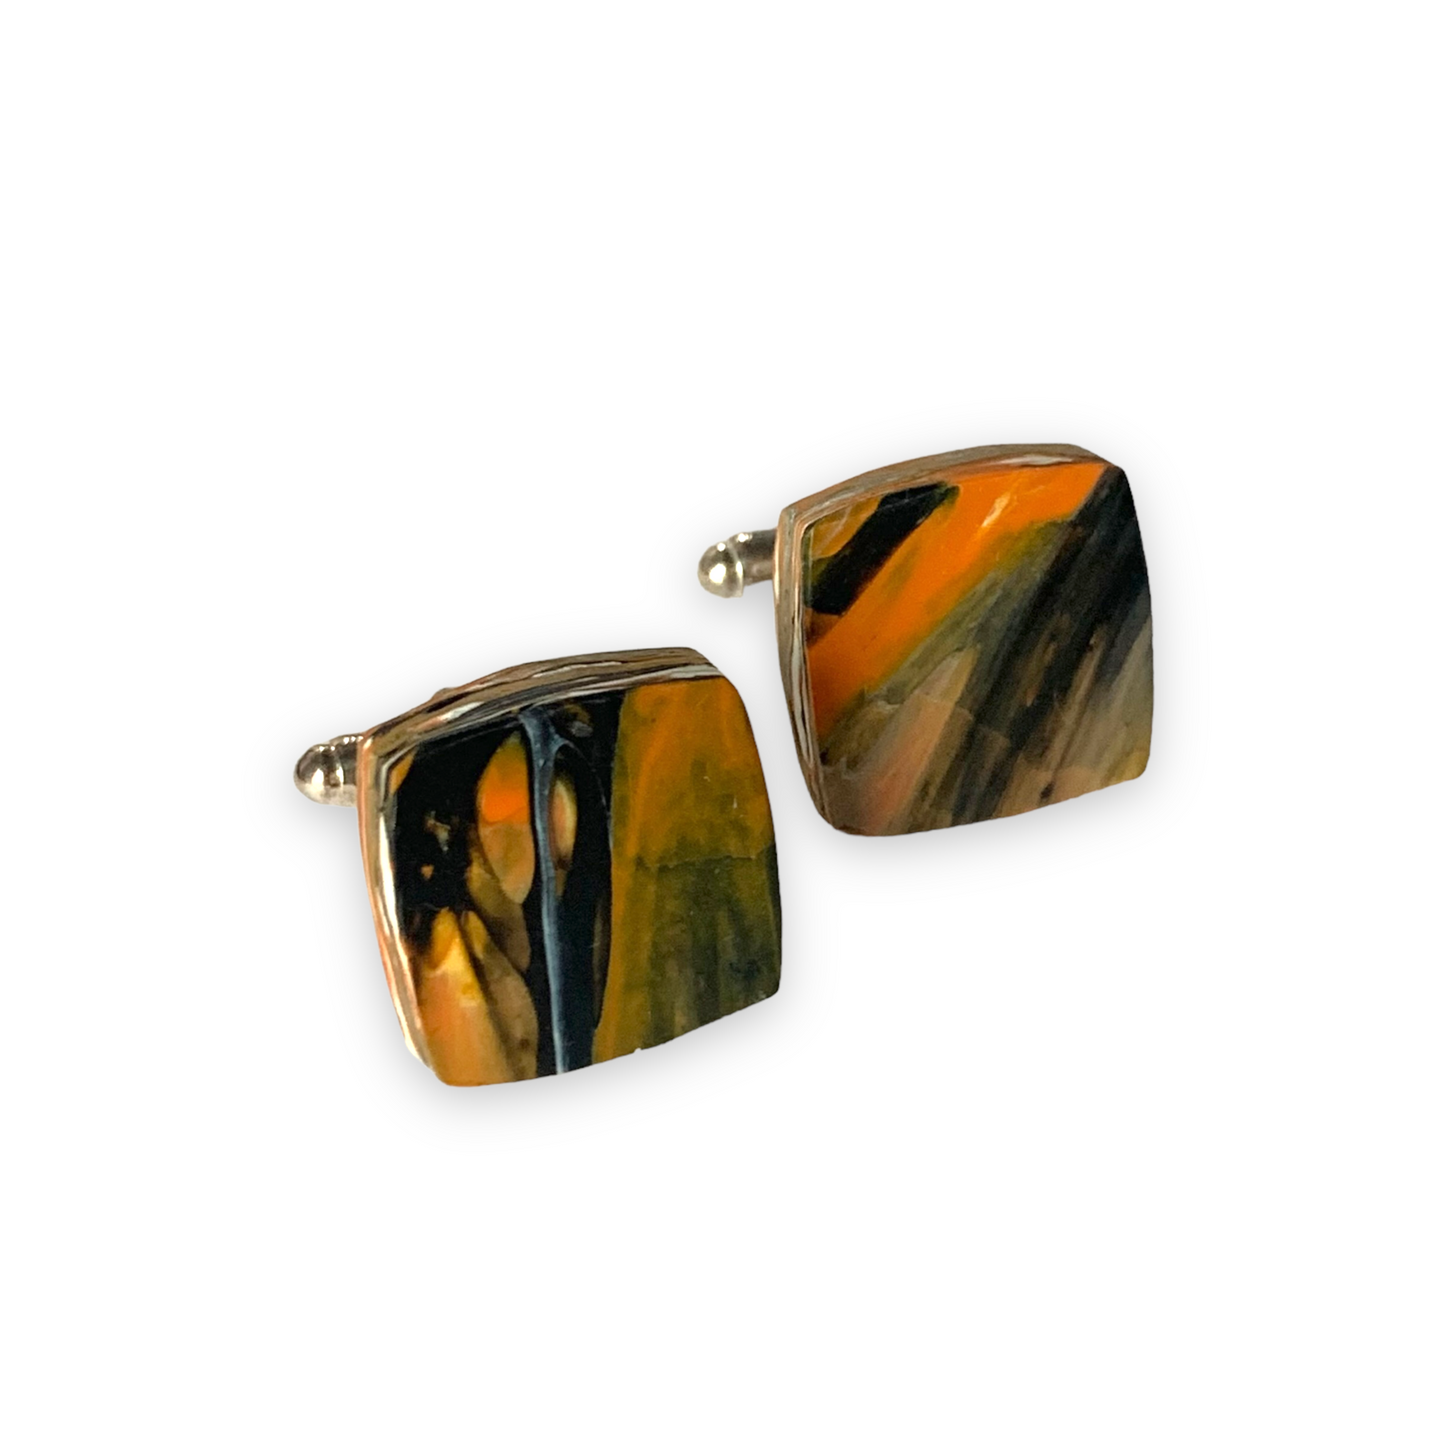 Unique Handmade Recycled Plastic Square Orange Cufflinks with brass findings